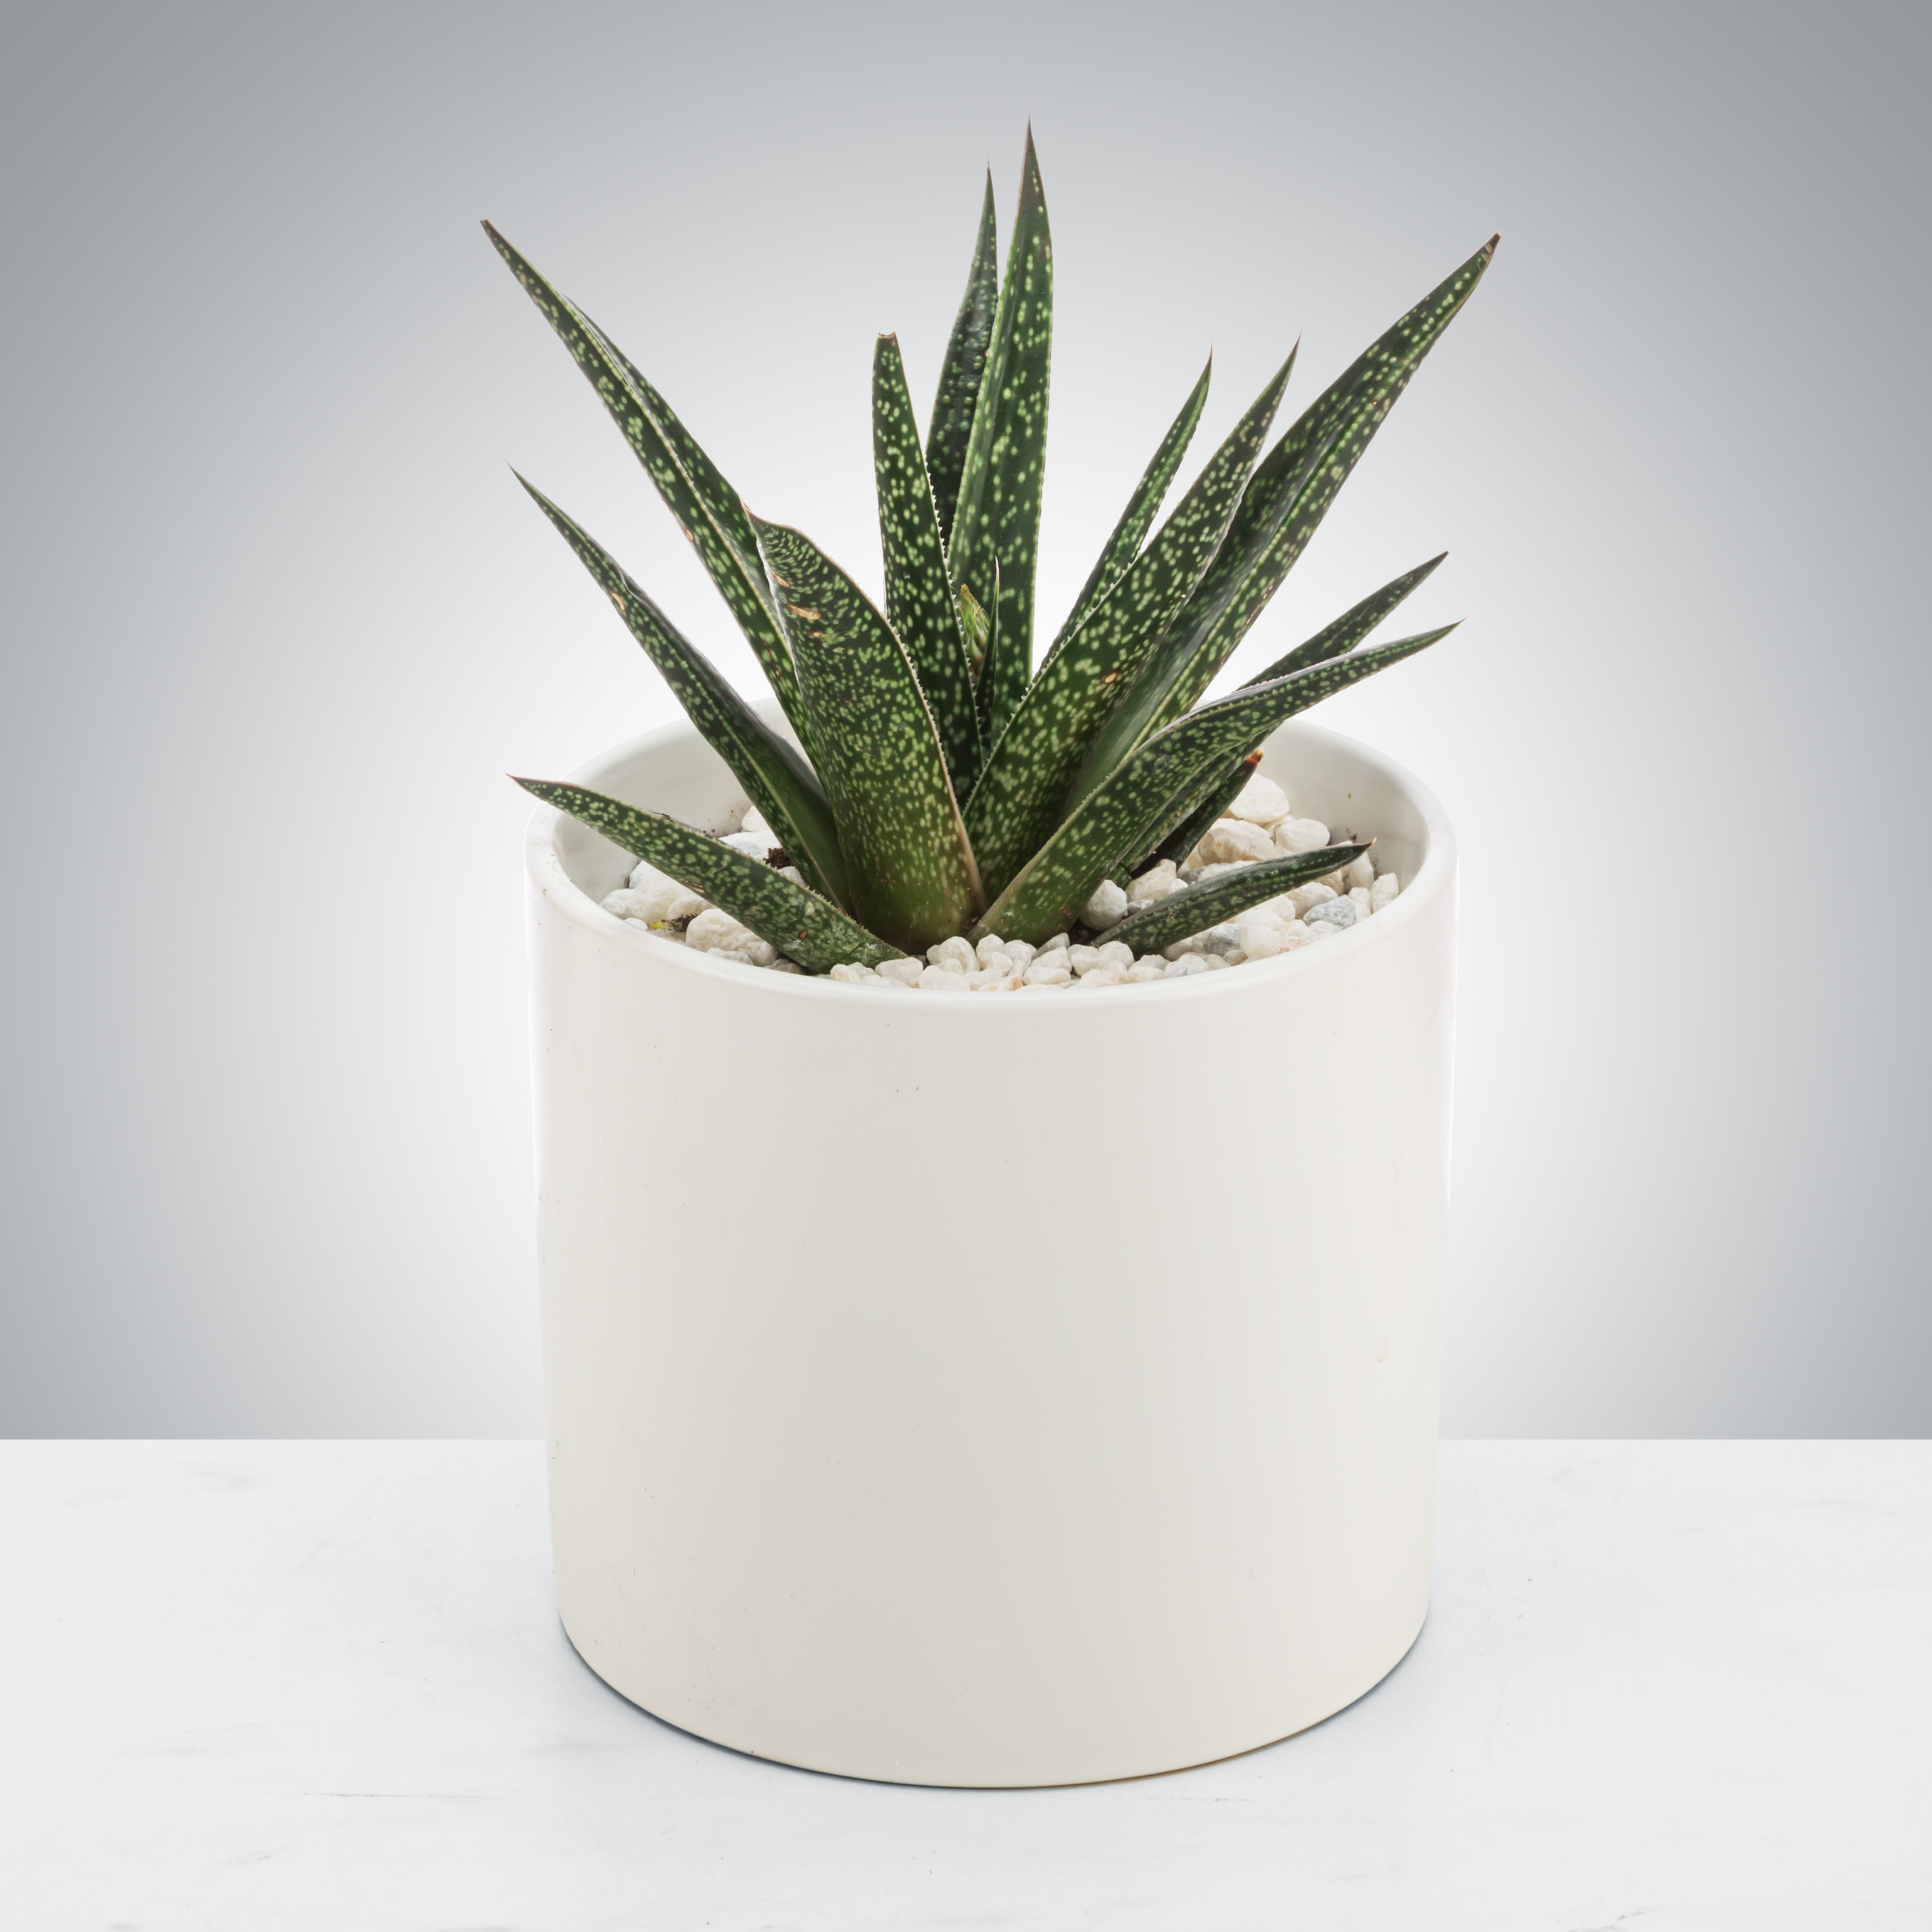 Aloe Plant - Aloe Plants like bright, indirect sunlight and deep but infrequent watering. Aloe Plants, along with being a great air filtering plant, look great on any desk and make a great gift for your plant friend!